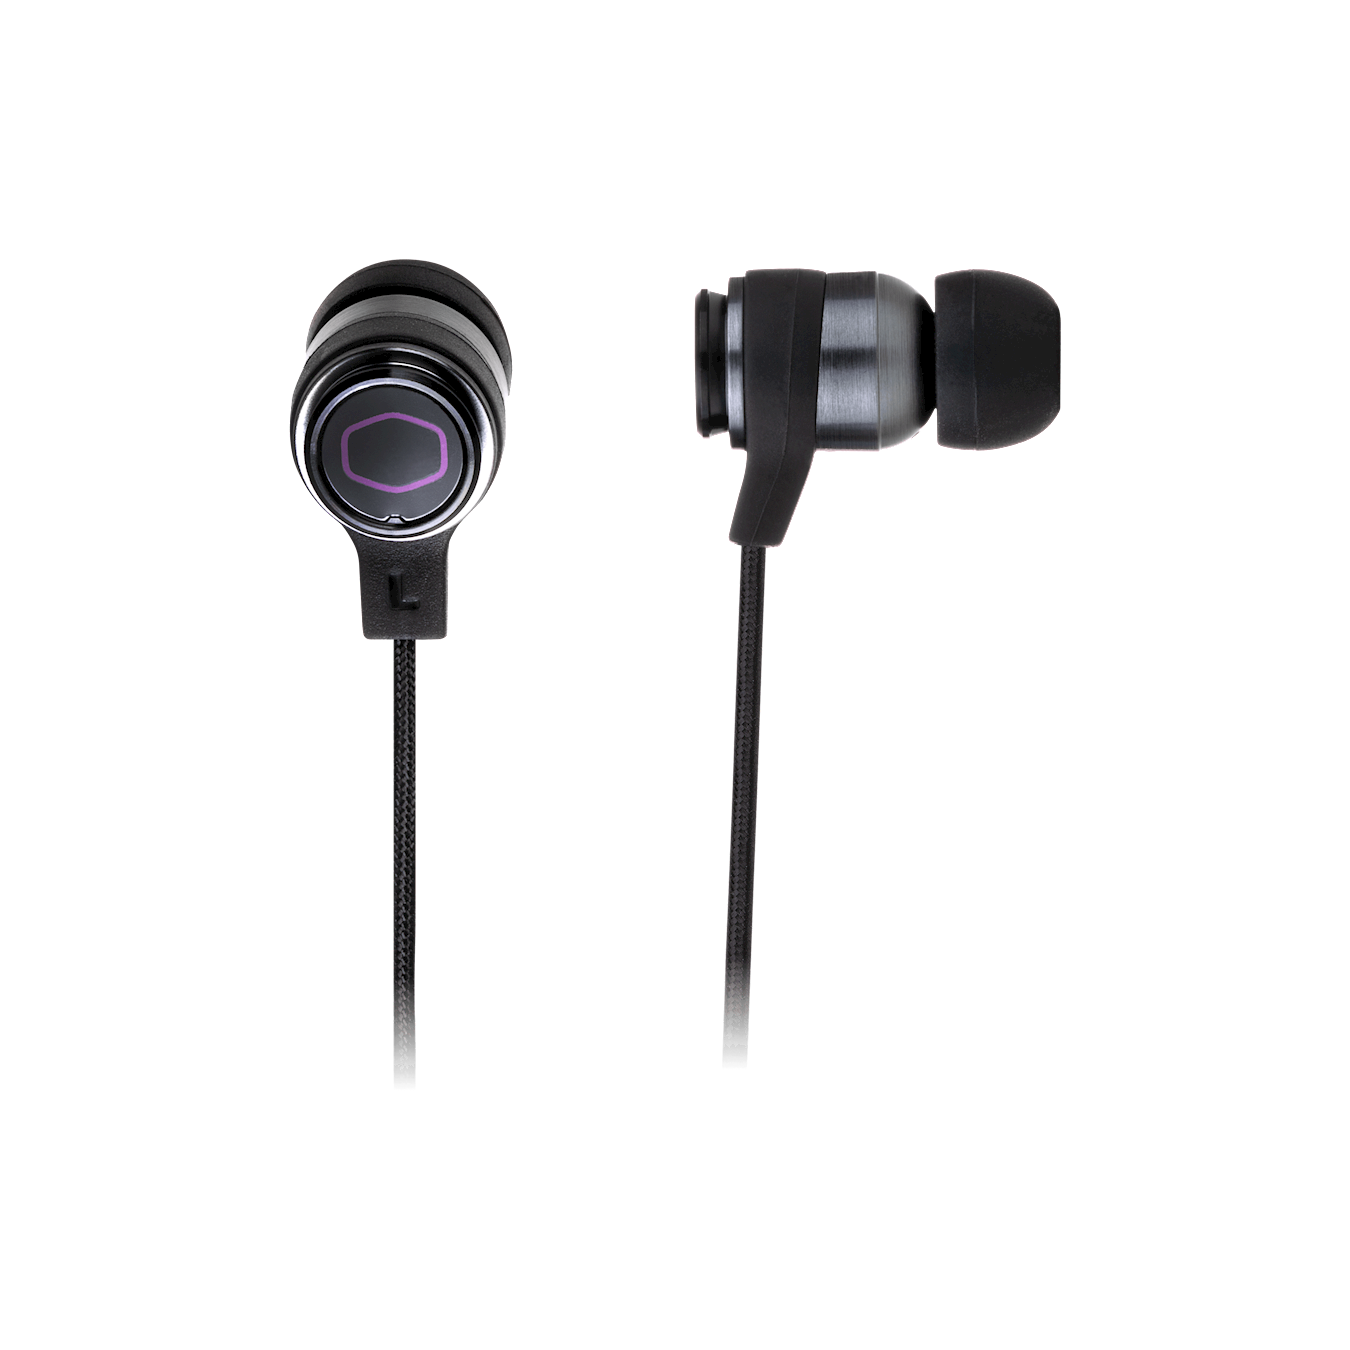 MH703 - a pair of high-performance gaming earbuds that focus on high-quality gaming audio